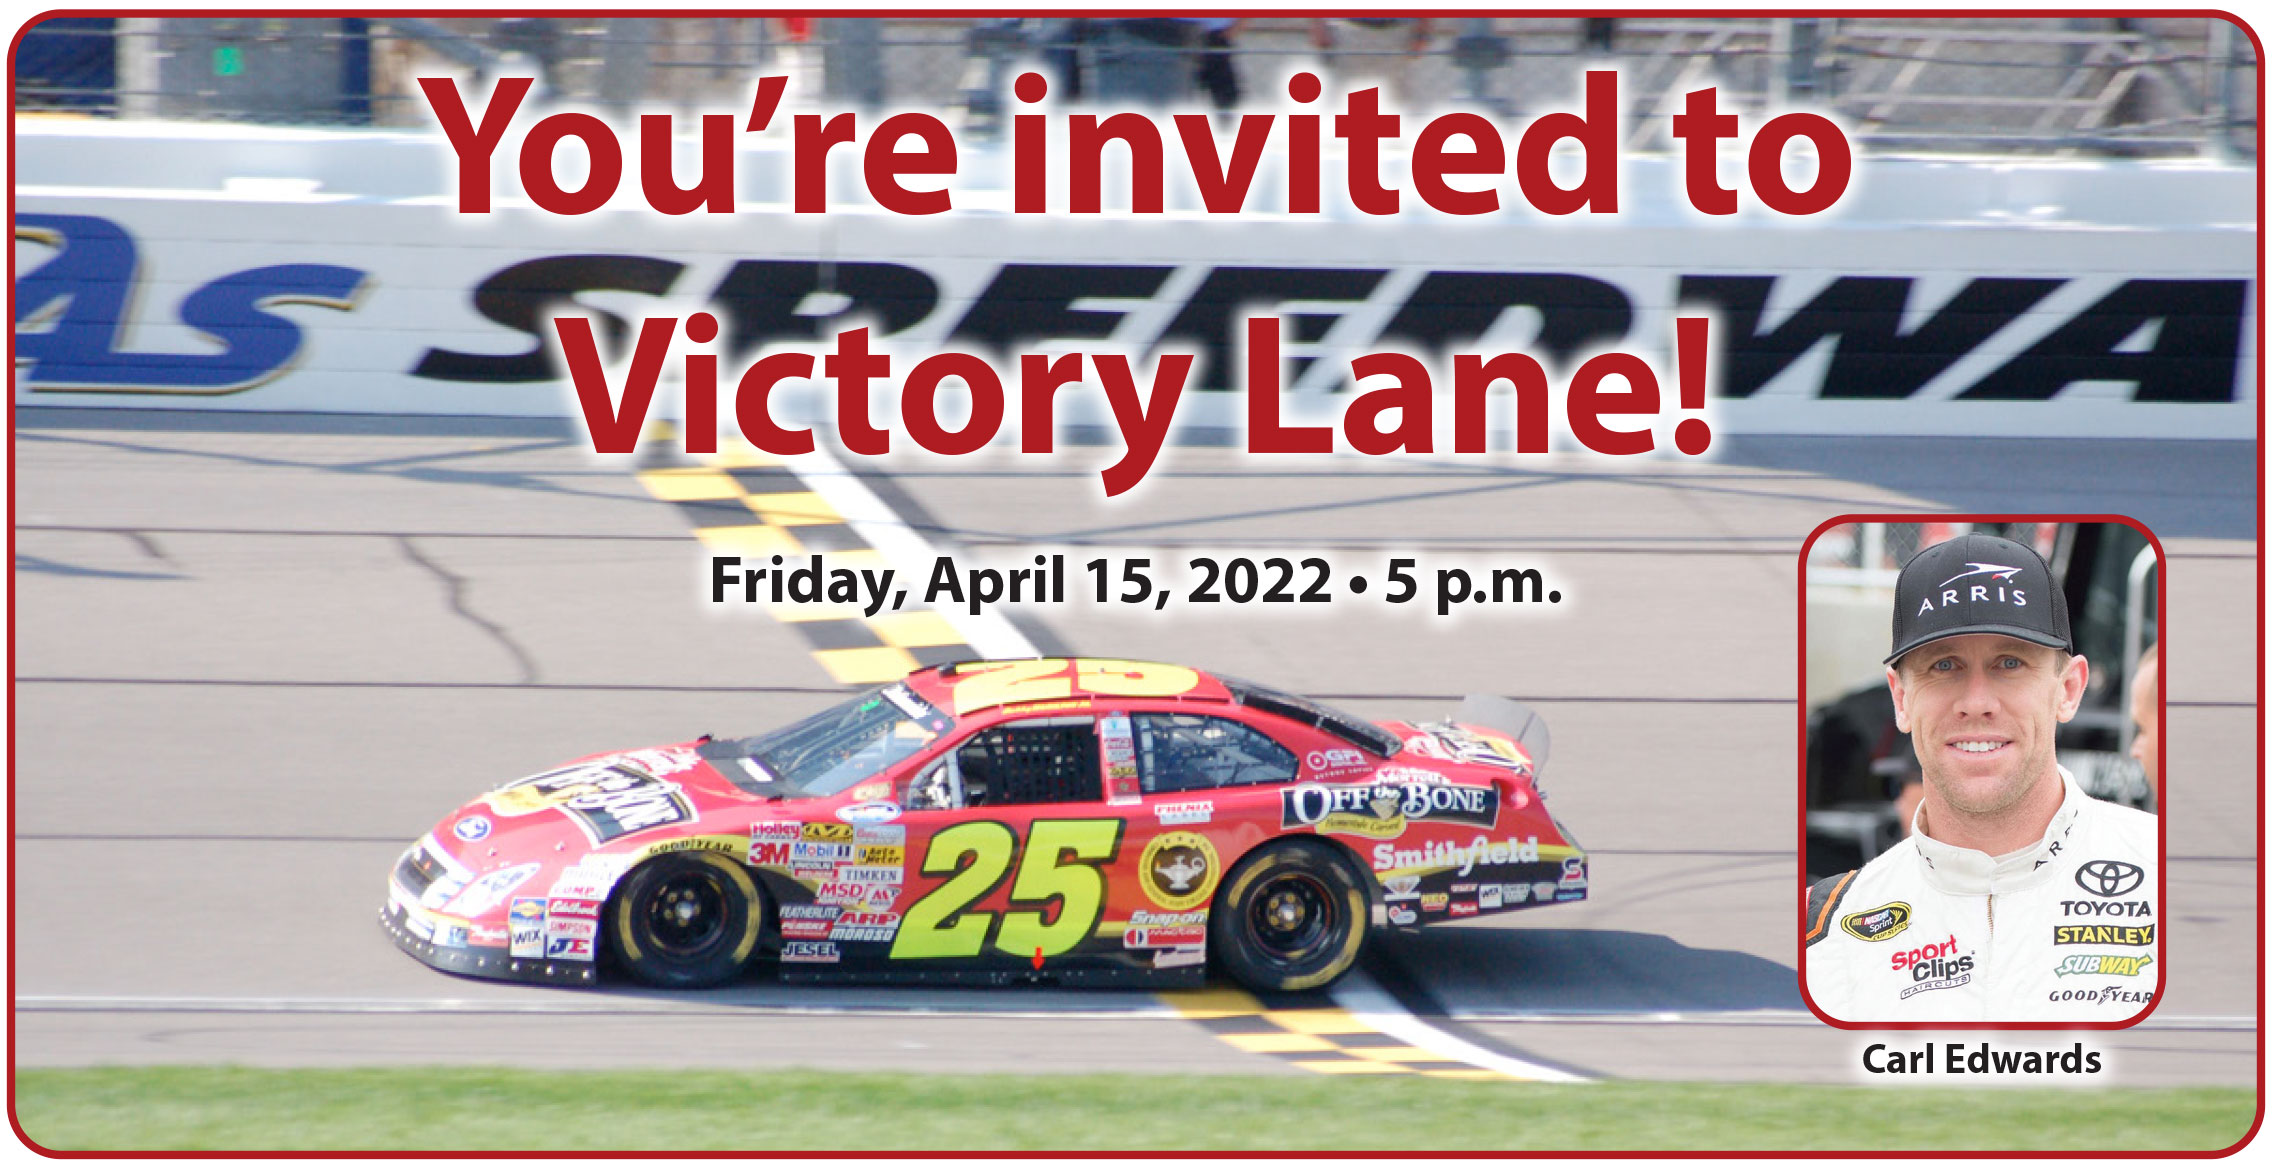 background is a photo of a NASCAR race car on the Kansas Speedway track. Over the photo background is text "You're invited to Victory Lane! April 15, 2022, 5 p.m." Also over the background is a photo of NASCAR driver Carl Edwards.